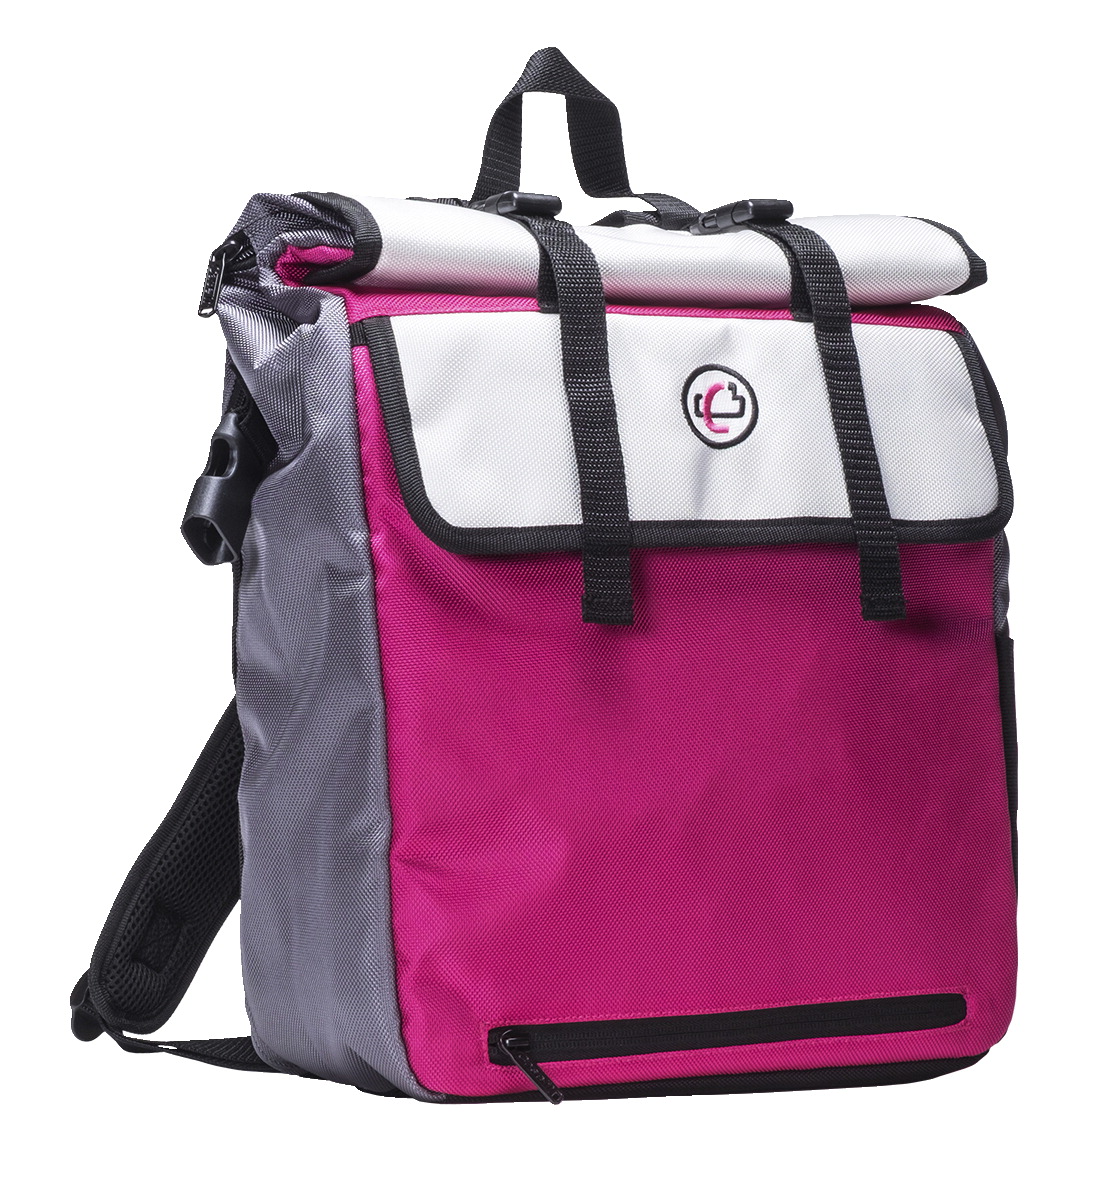 2004443 6 X 12.4 X 16.25 In. Rolltop Backpack, Pink With White Trim